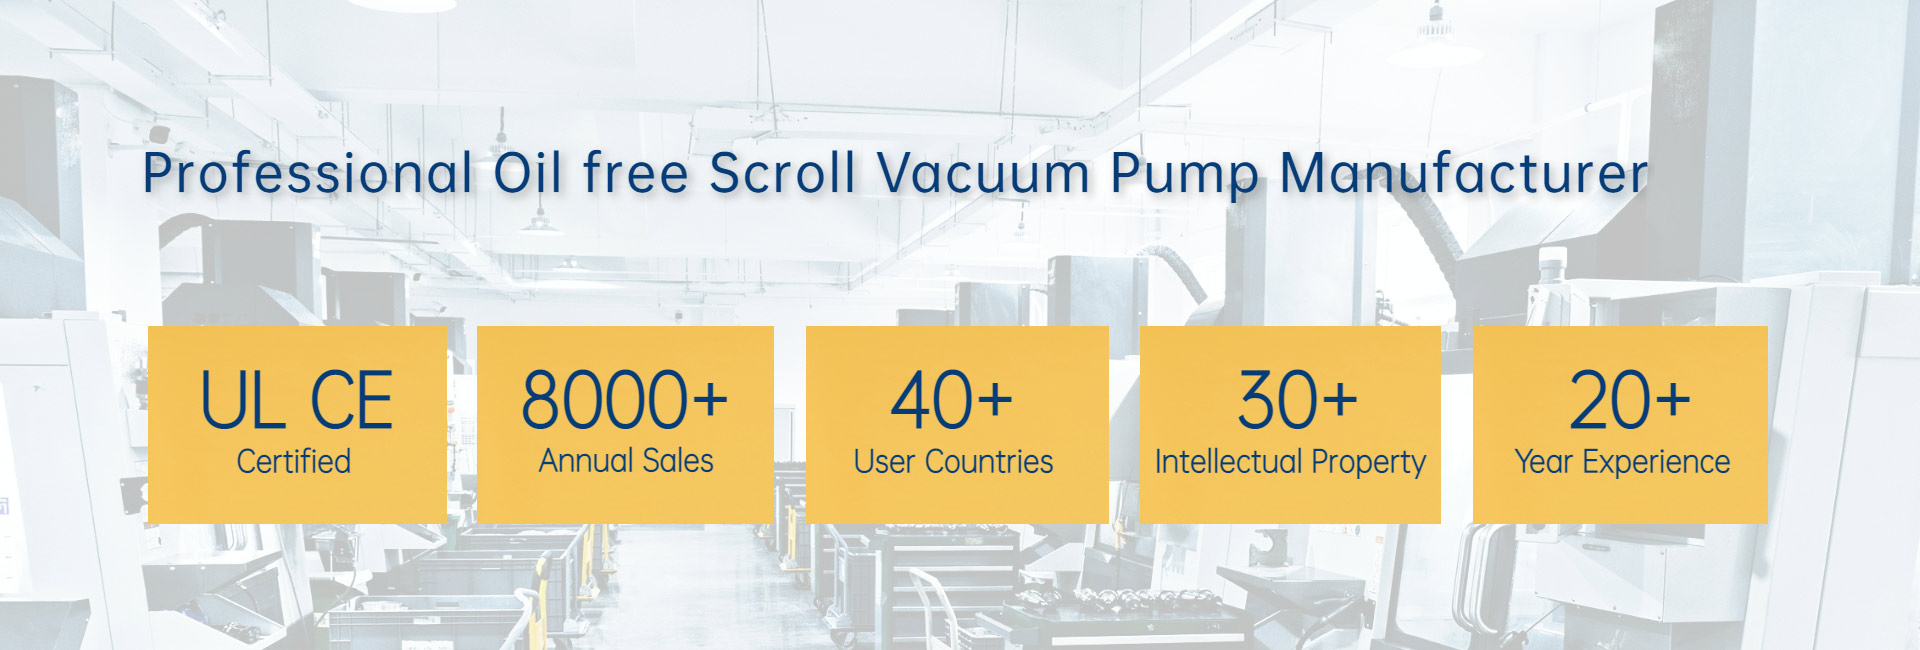 High quality oil free scroll vacuum pumps' manufacturer